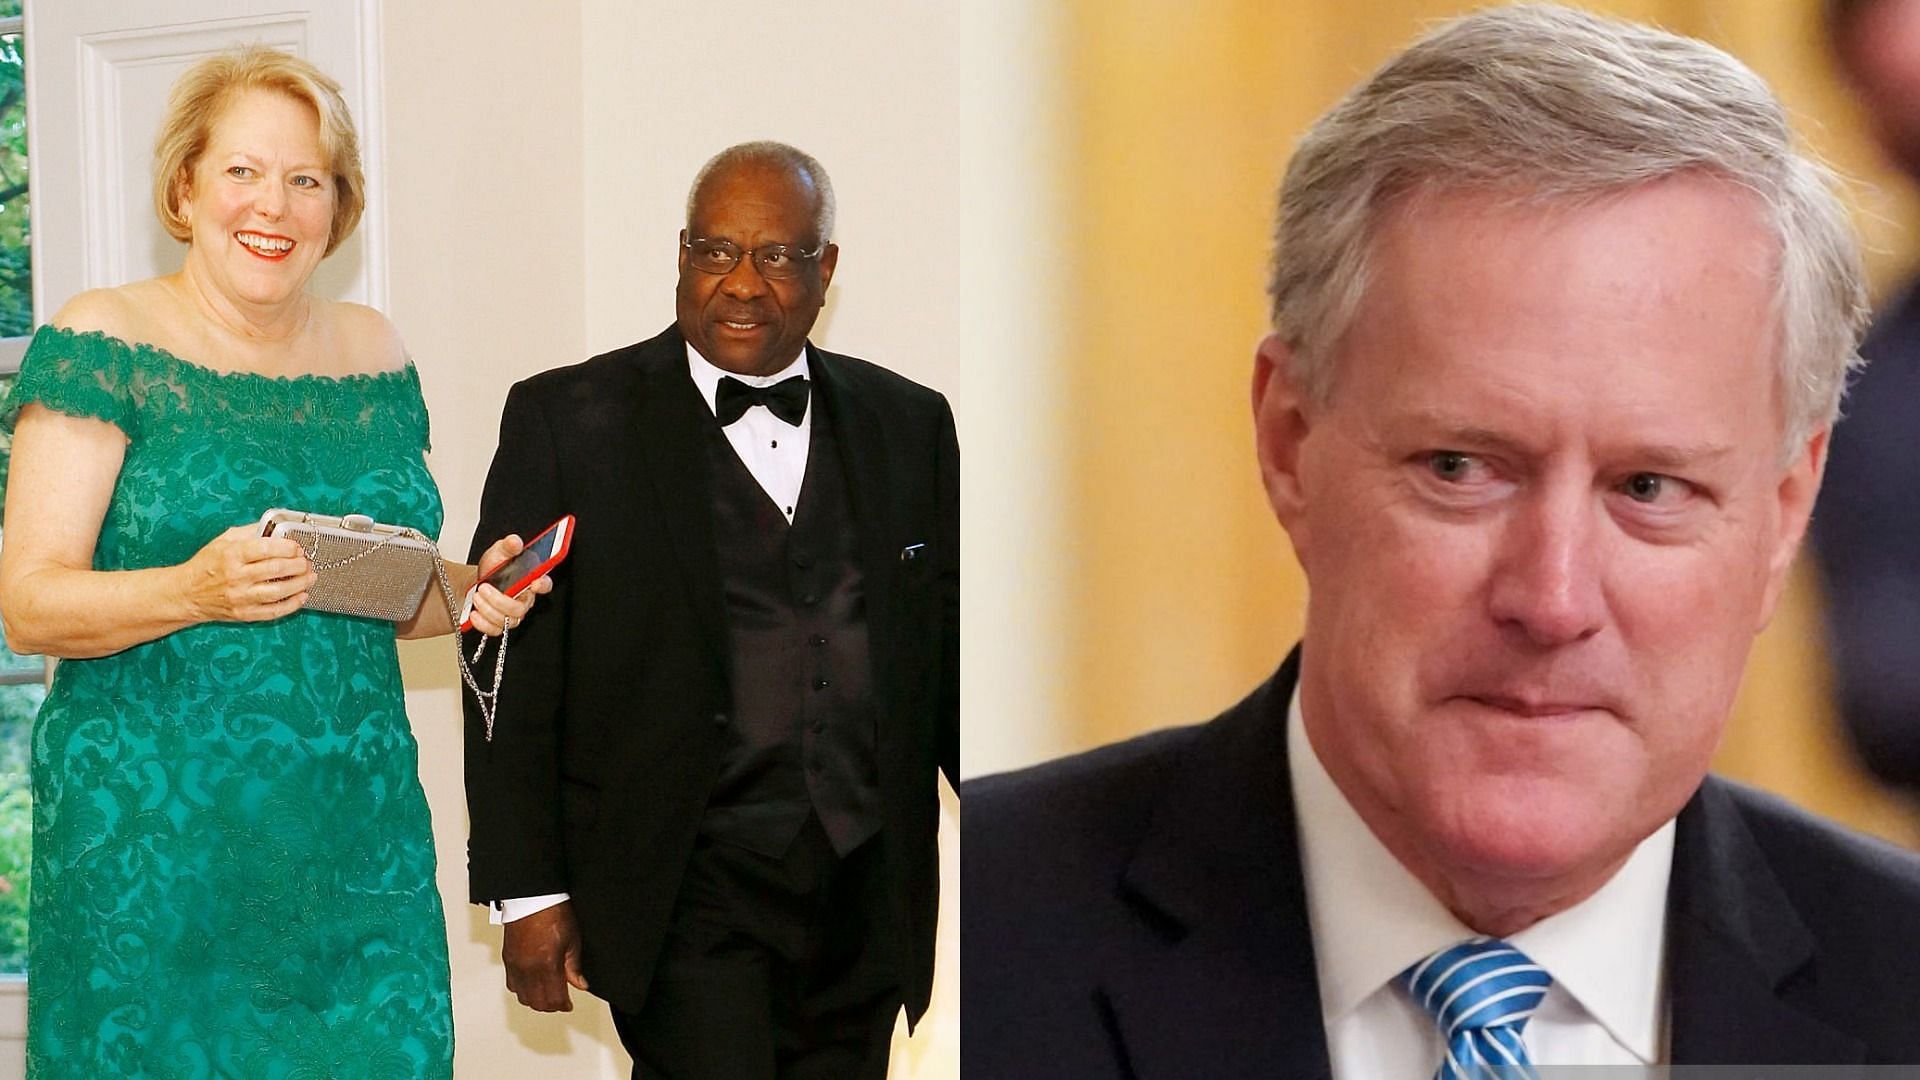 Ginni Thomas reportedly sent text messages to Mark Meadows to plan about overturning the 2020 US elections results (Image via Paul Morigi/Getty Images and Joshua Roberts/Getty Images)